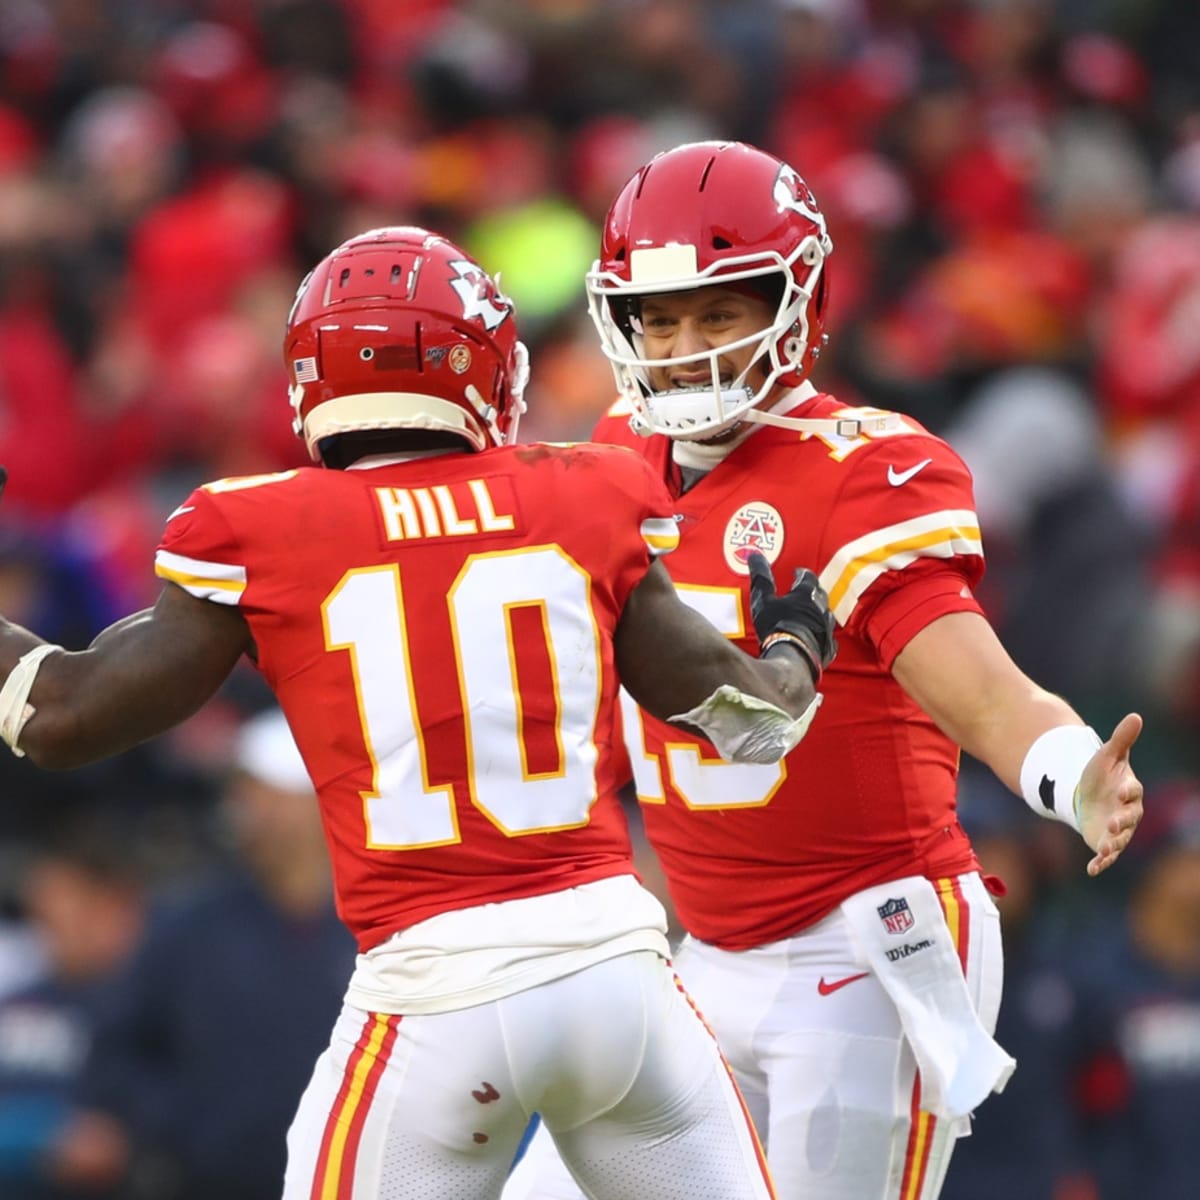 NewsChannel 5 Nashville - A Nashville designer will be styling Kansas City  Chiefs QB Patrick Mahomes. He says a team of 12 worked to create Mahomes'  look for the biggest game of